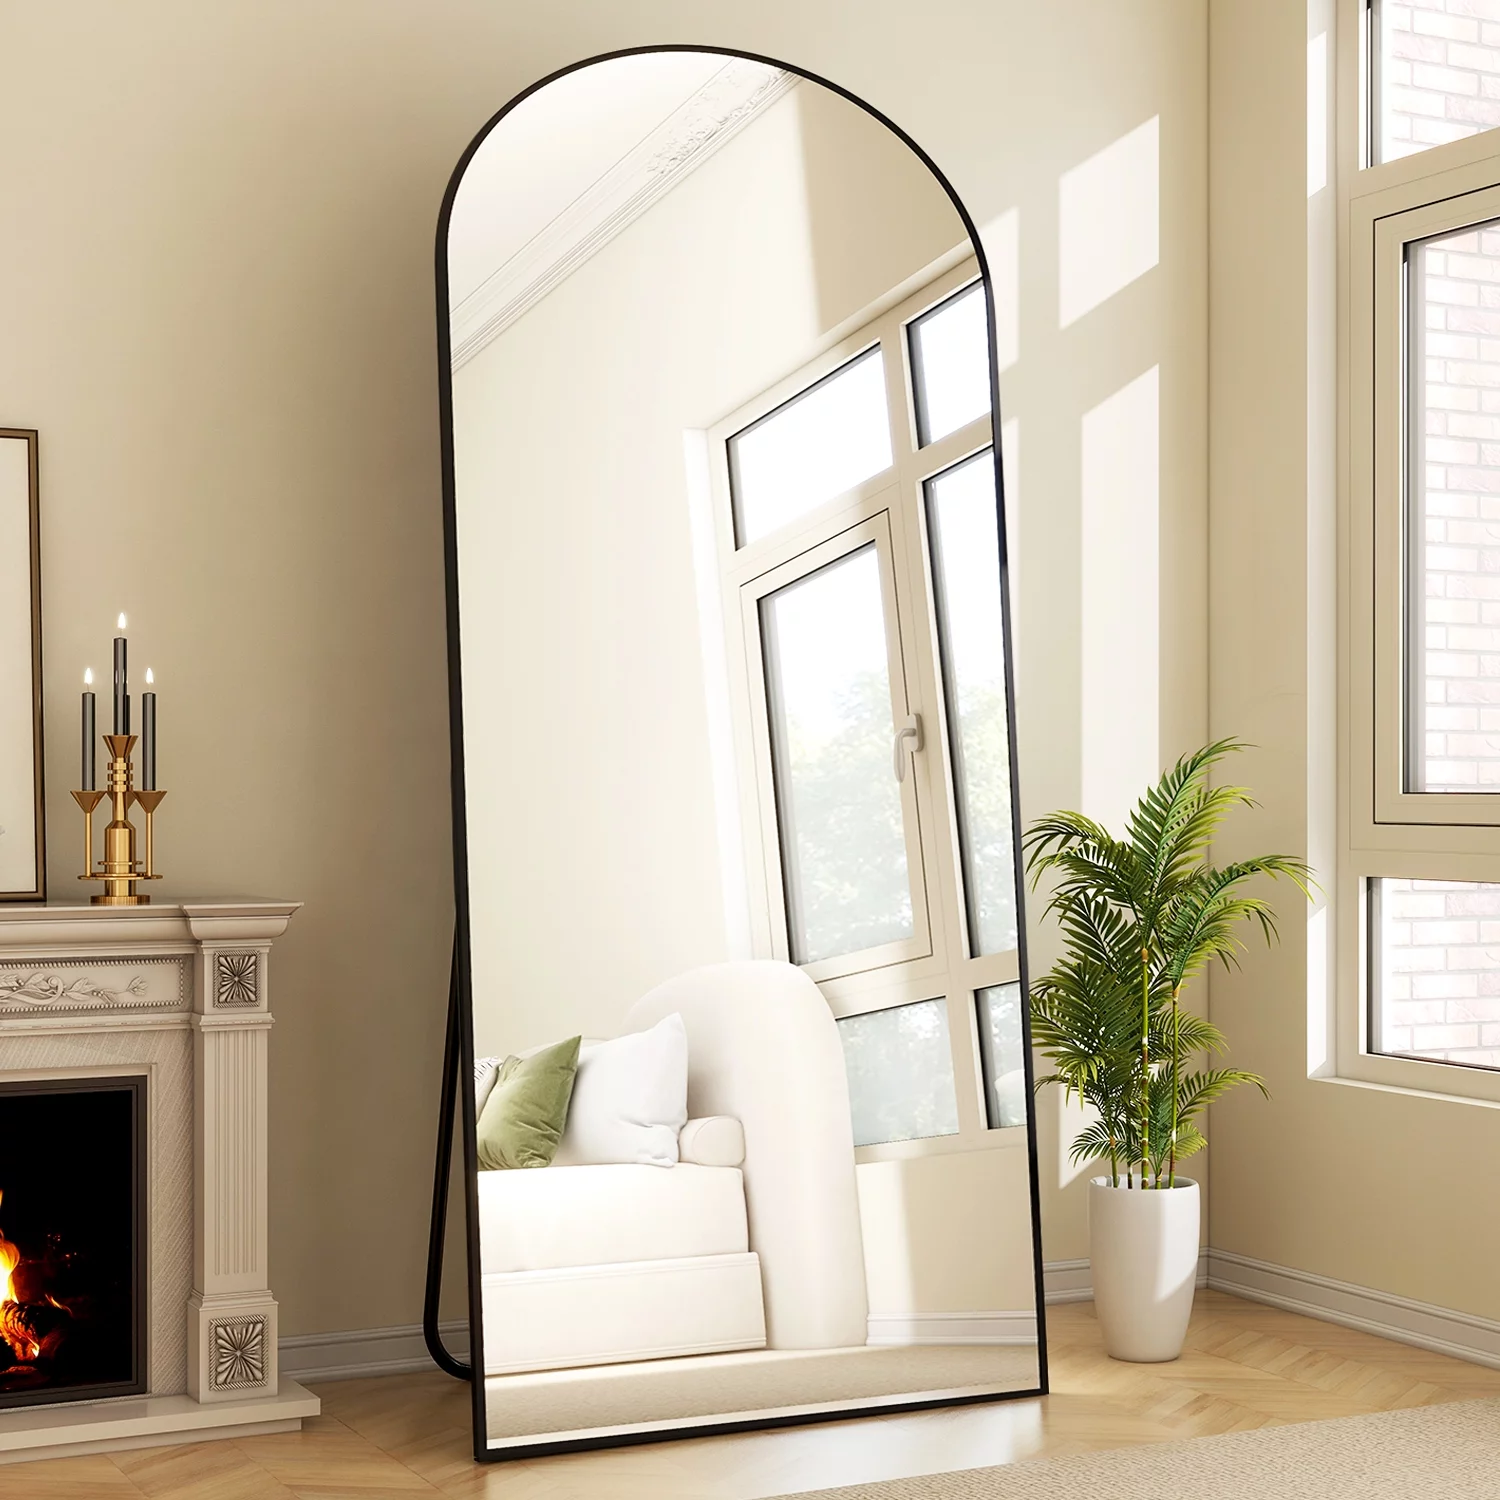 BEAUTYPEAK 71"x30" Full Length Mirror Oversized Arched Body Dressing Floor Mirrors for Standing Leaning, Black